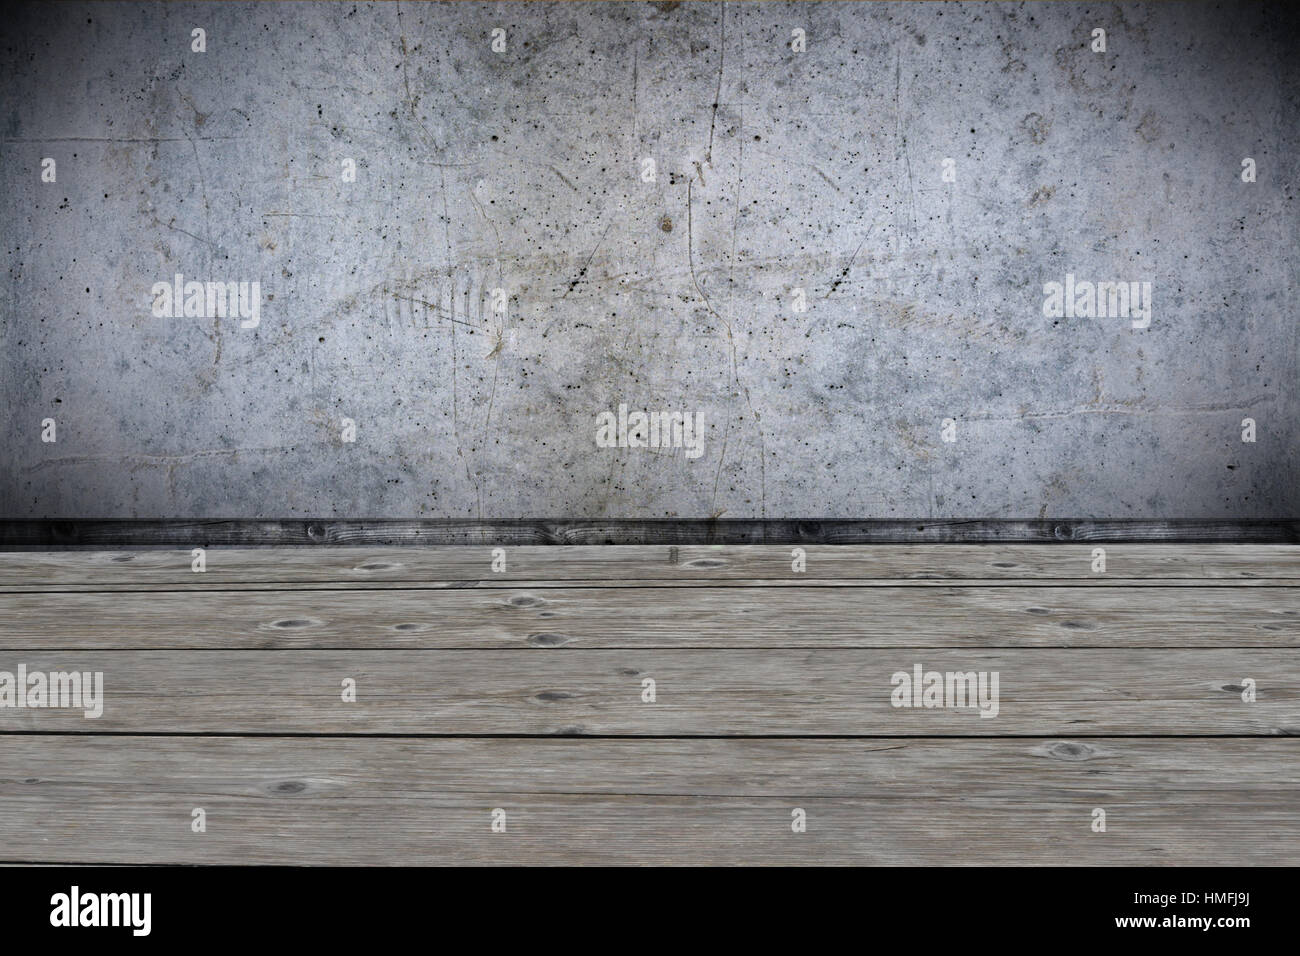 Room interior with wooden floor and concrete walls as background Stock Photo